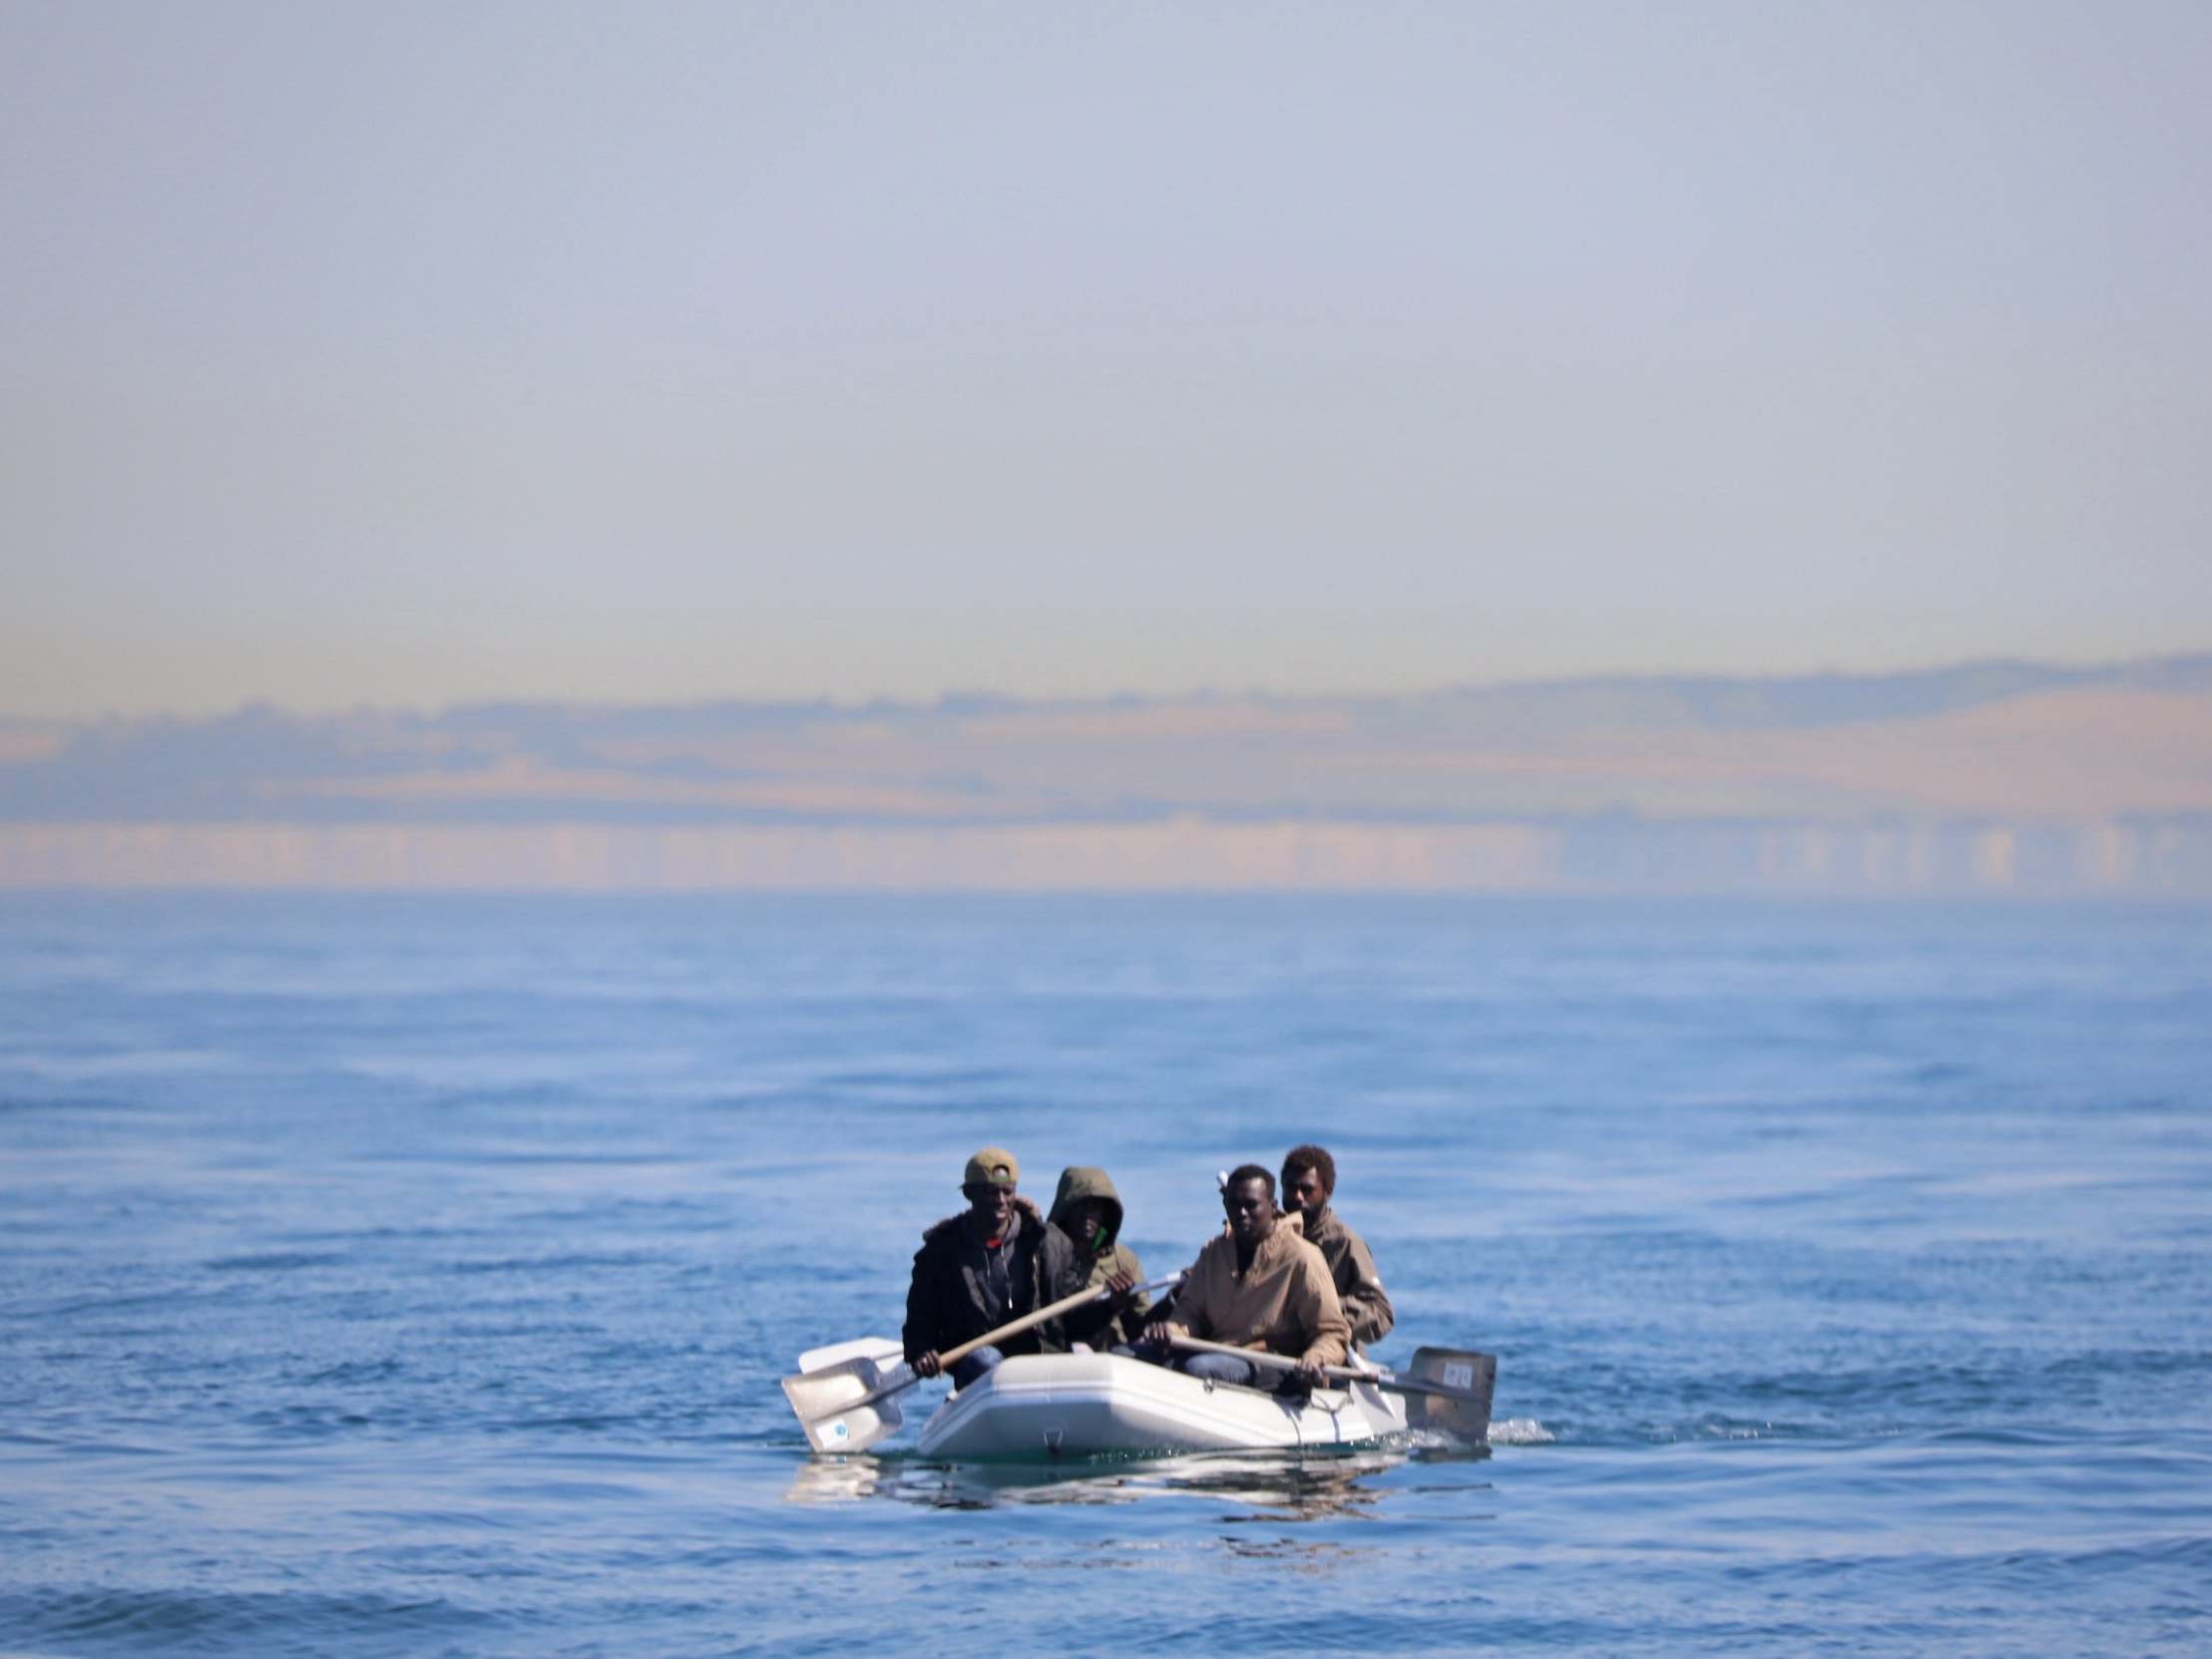 Four men off the coast of France, some using shovels as paddles, use a small dinghy to cross the English Channel on 7 August 2020